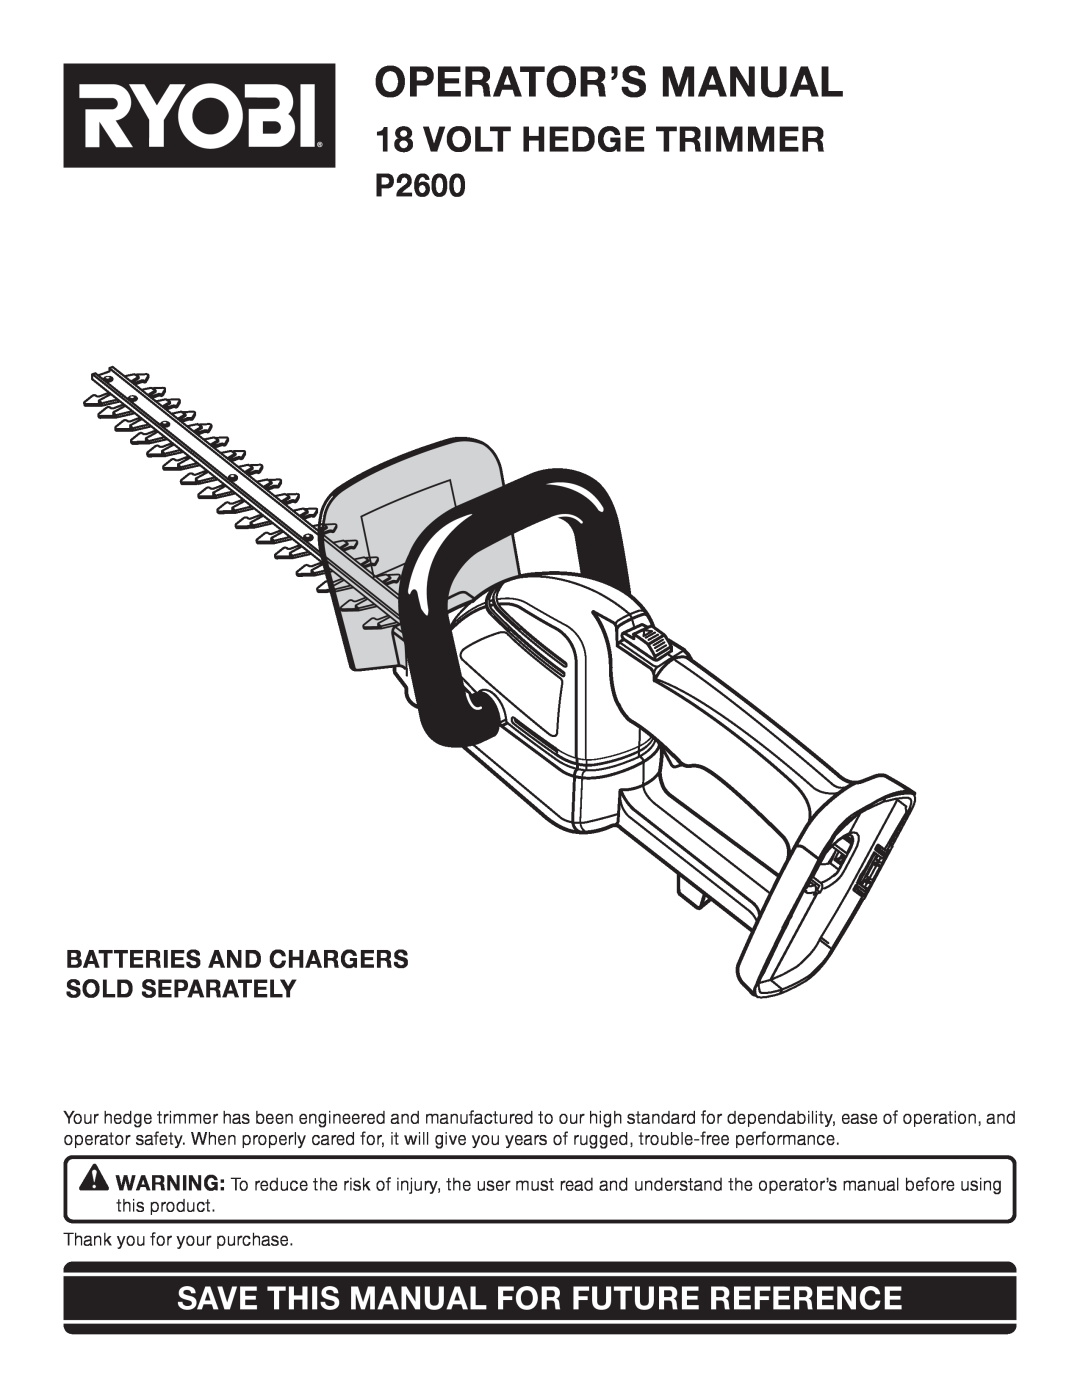 Ryobi Outdoor P2600 manual Operator’S Manual, Volt Hedge Trimmer, Save This Manual For Future Reference 